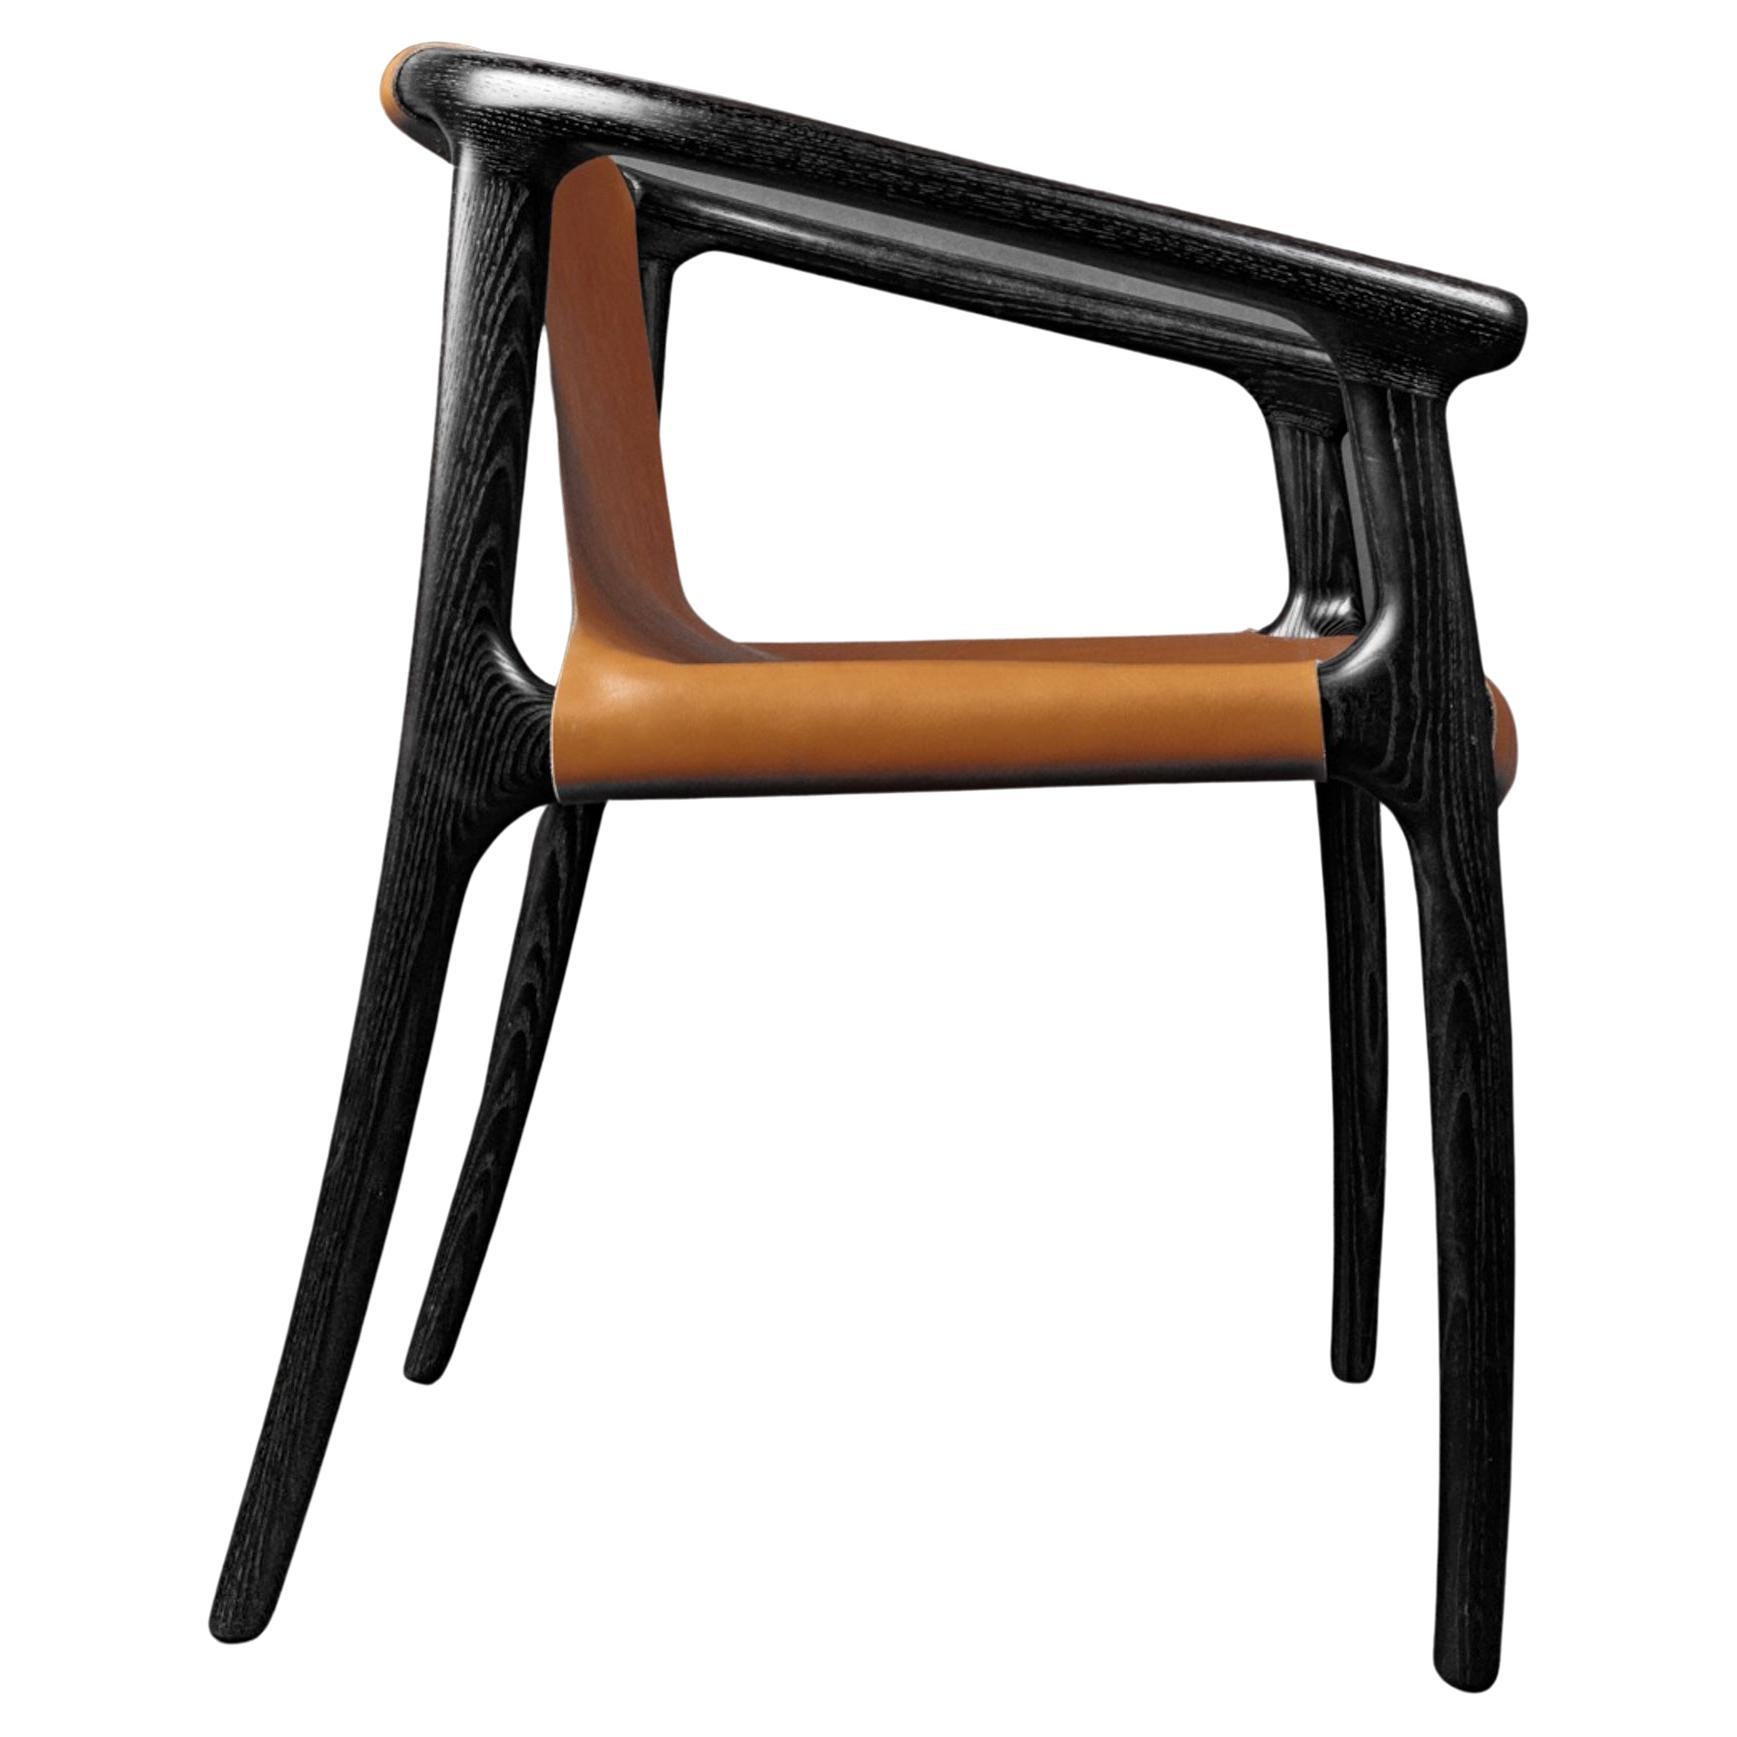 TUSK Sling Chair in Saddle Leather by Möbius Objects